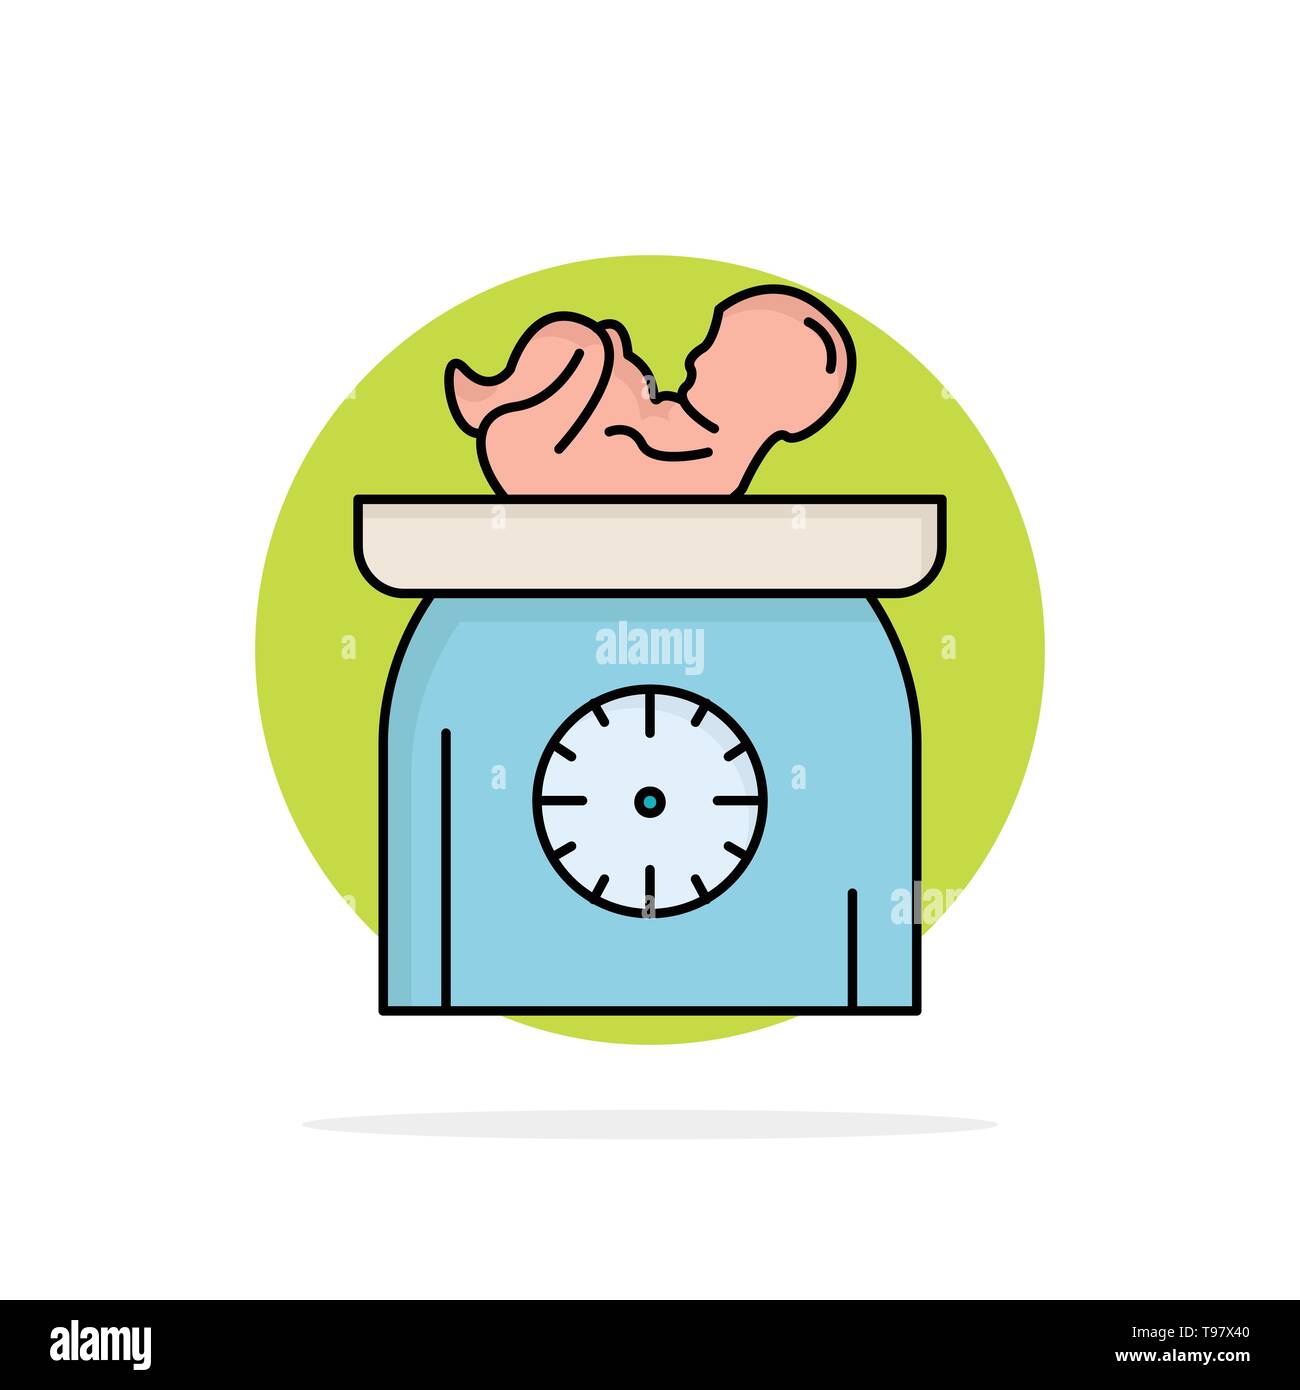 460+ Baby Weight Scale Stock Illustrations, Royalty-Free Vector Graphics &  Clip Art - iStock